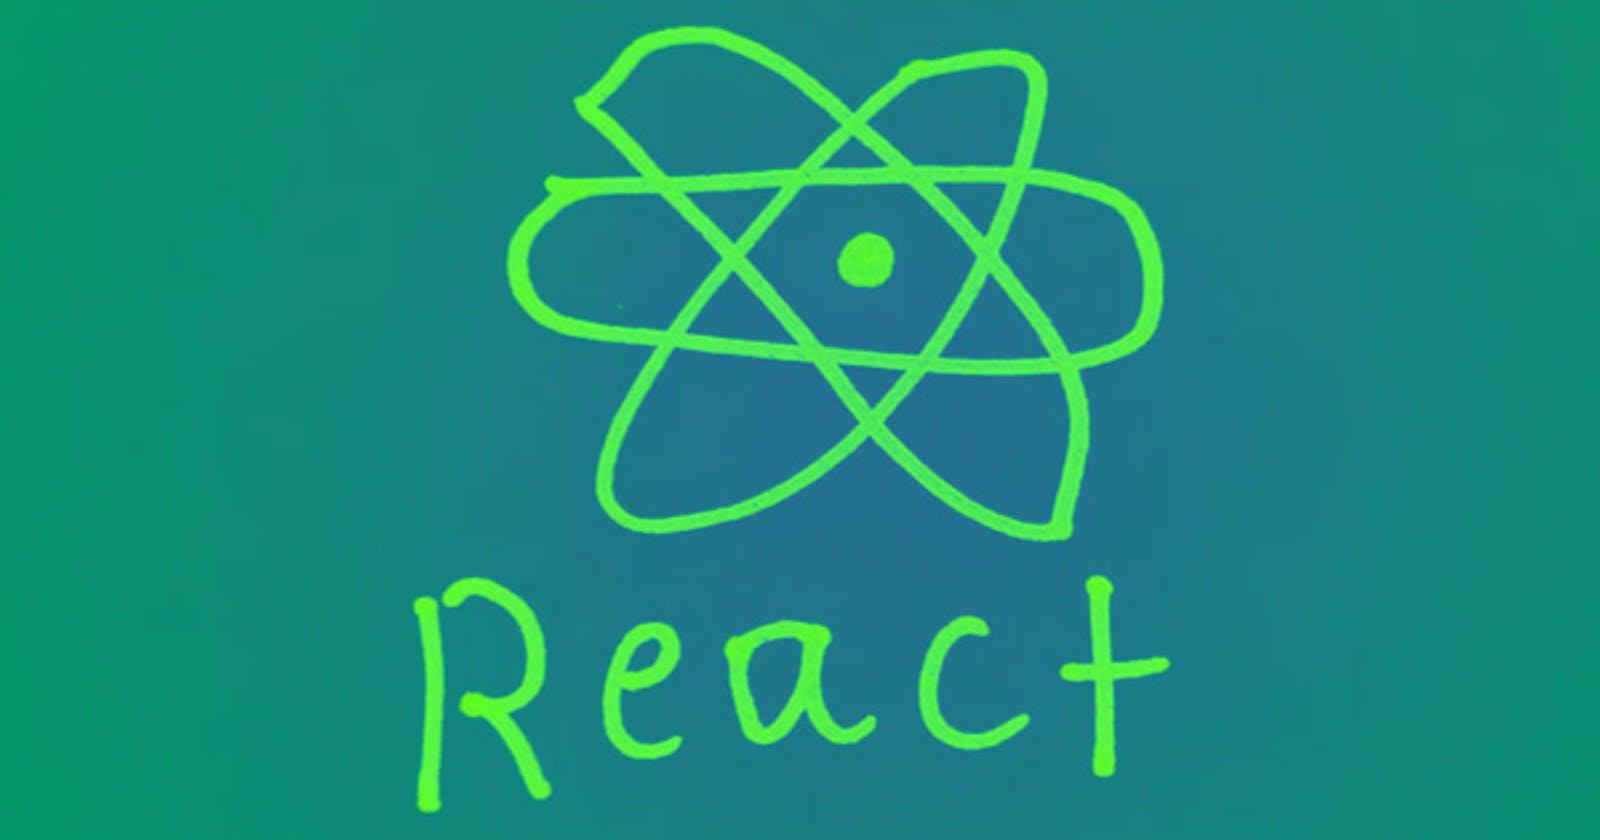 Getting started with React in 2017